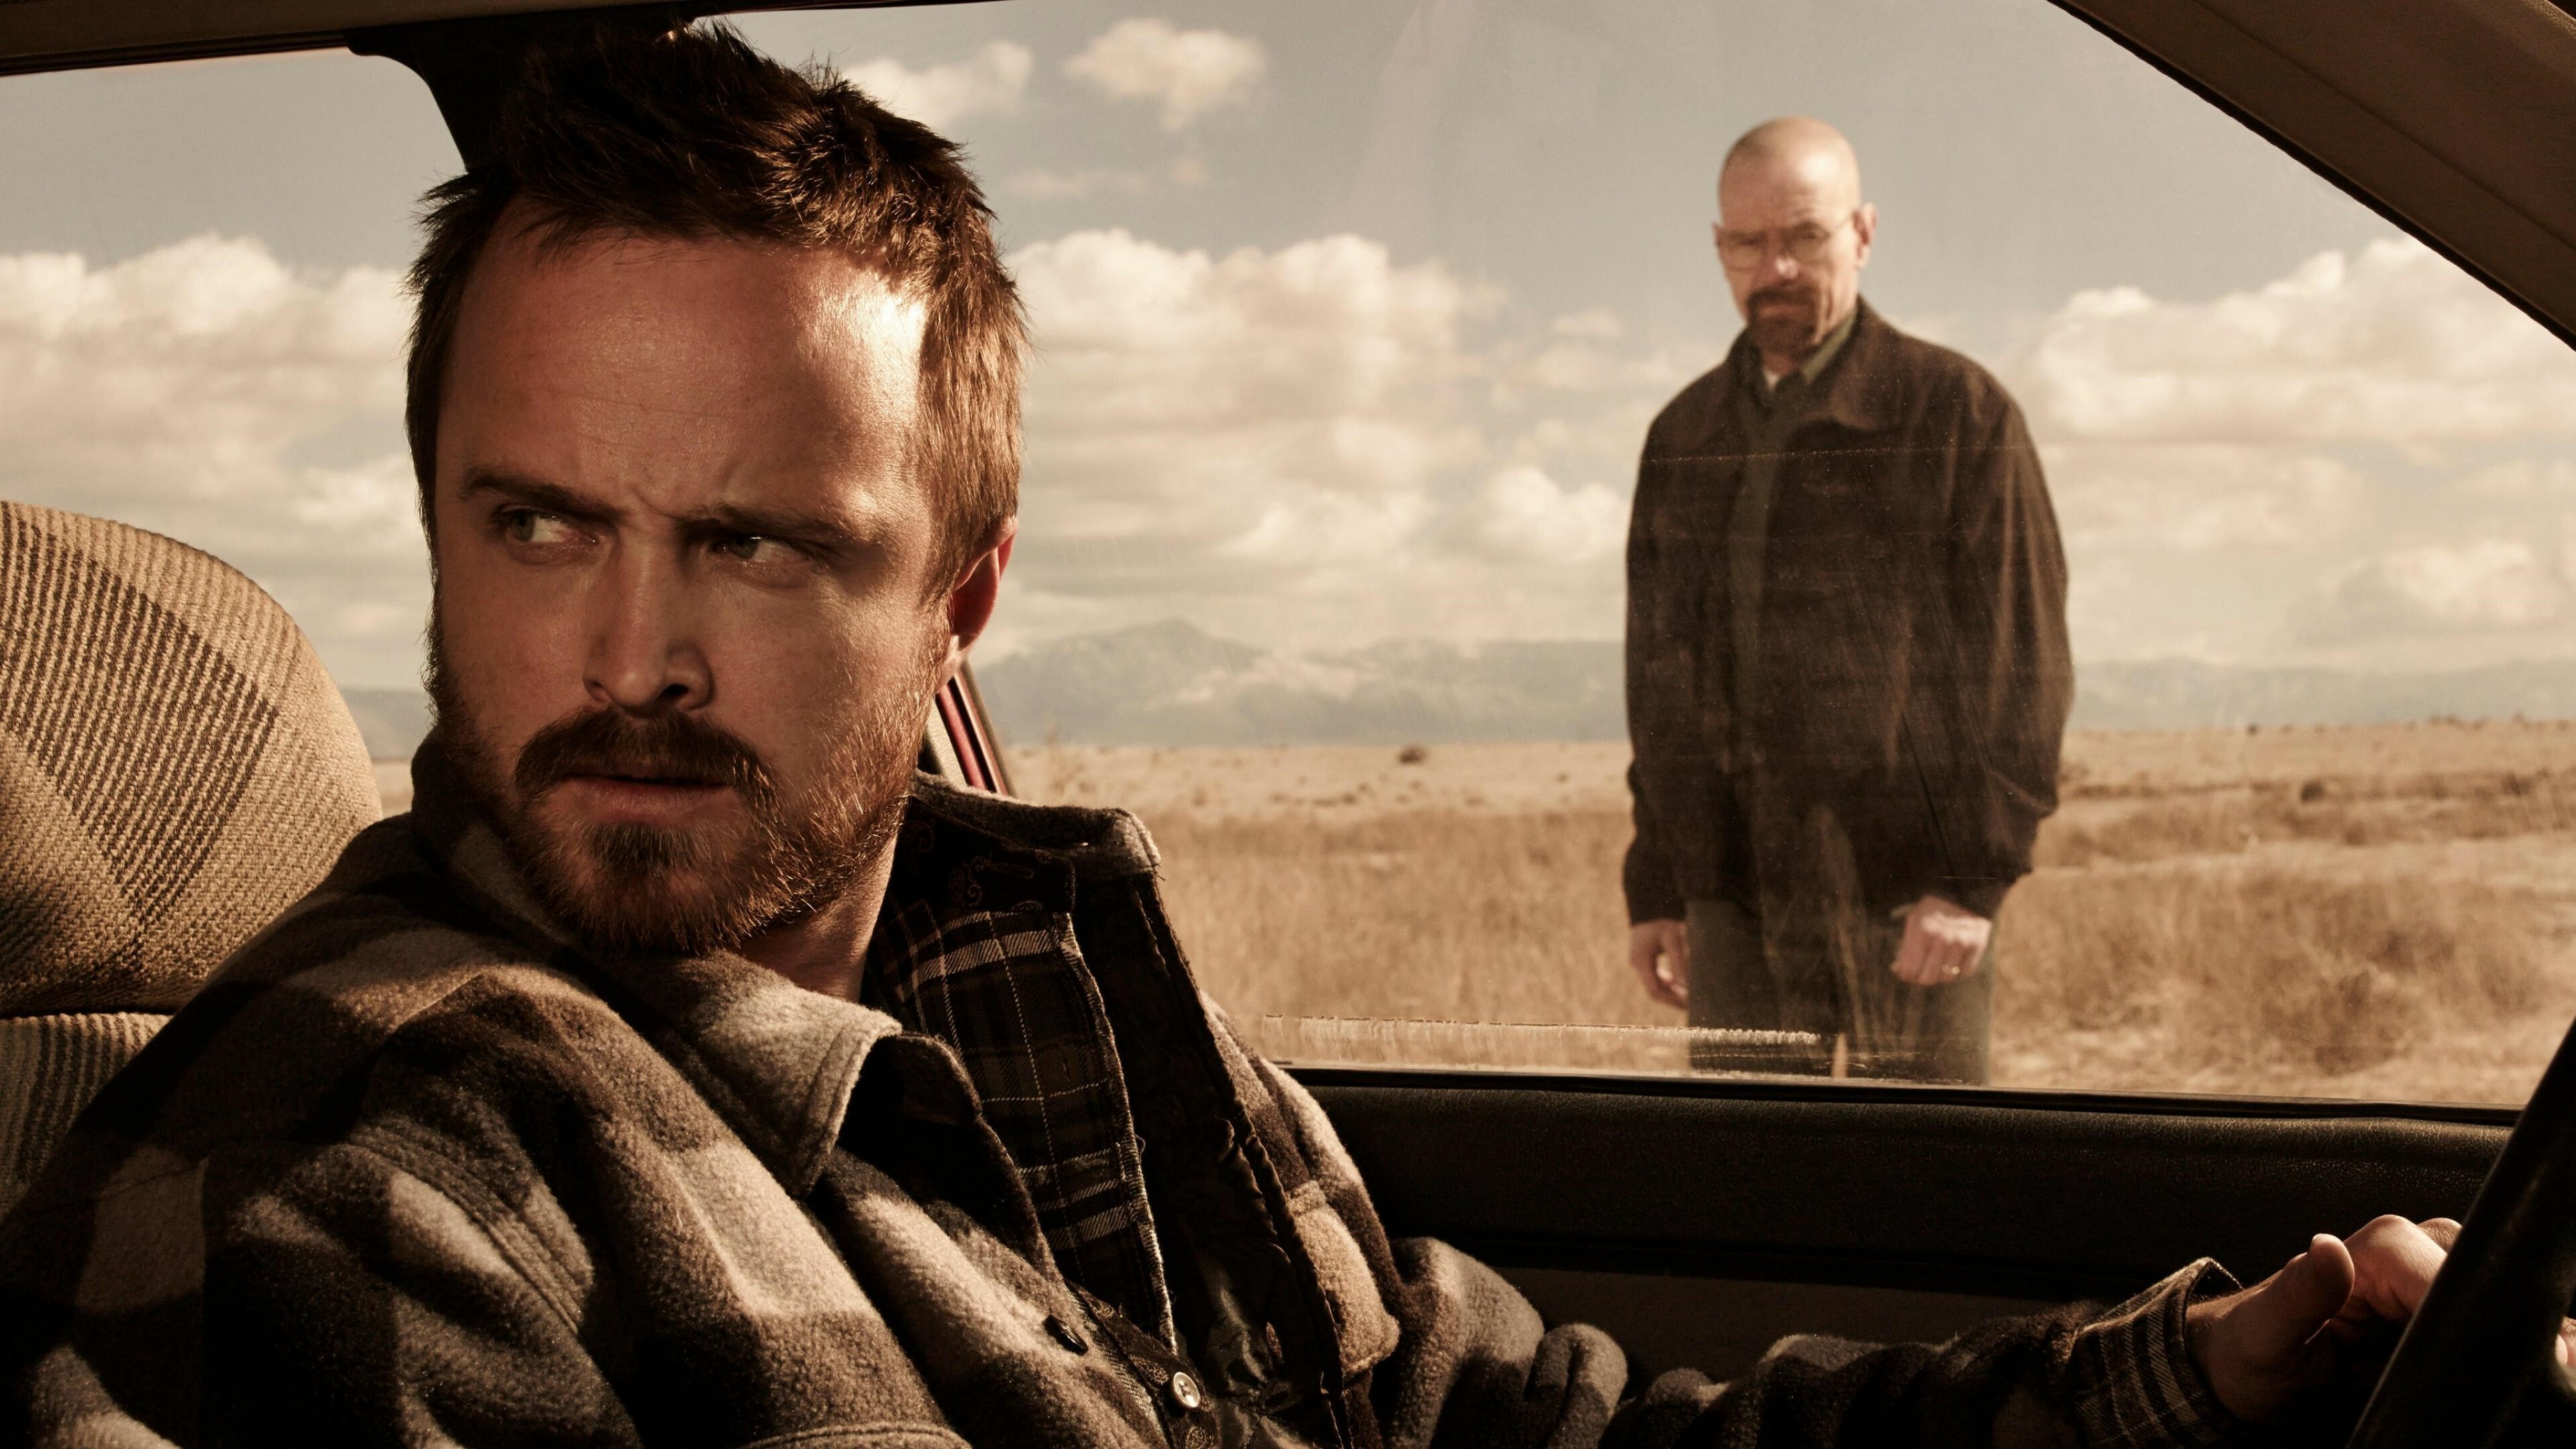 Breaking Bad: Bryan Cranston, Aaron Paul, An American actor, best known for portraying Jesse Pinkman in the AMC series. 3840x2160 4K Background.